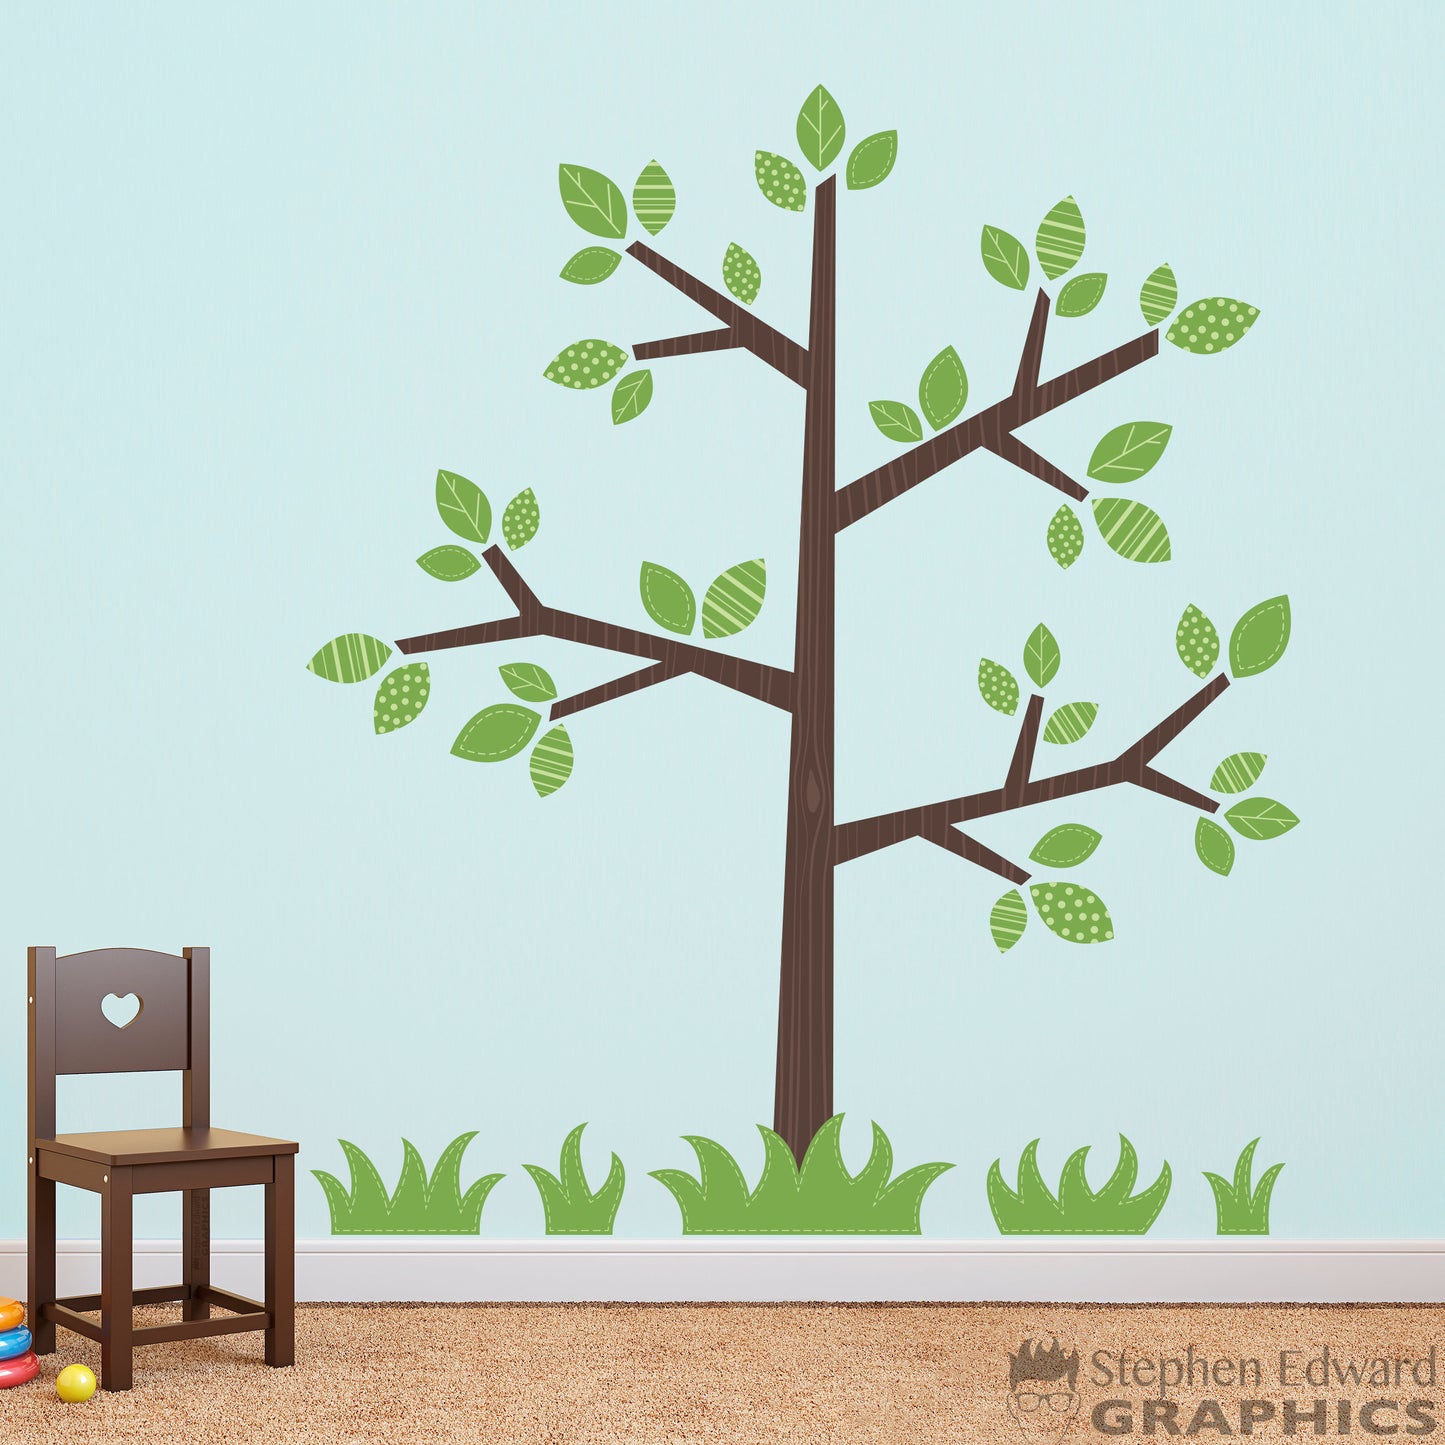 Tree Decal with Leaves & Grass patches - Children Wall Decal - Nursery Decor - Multiple sizes